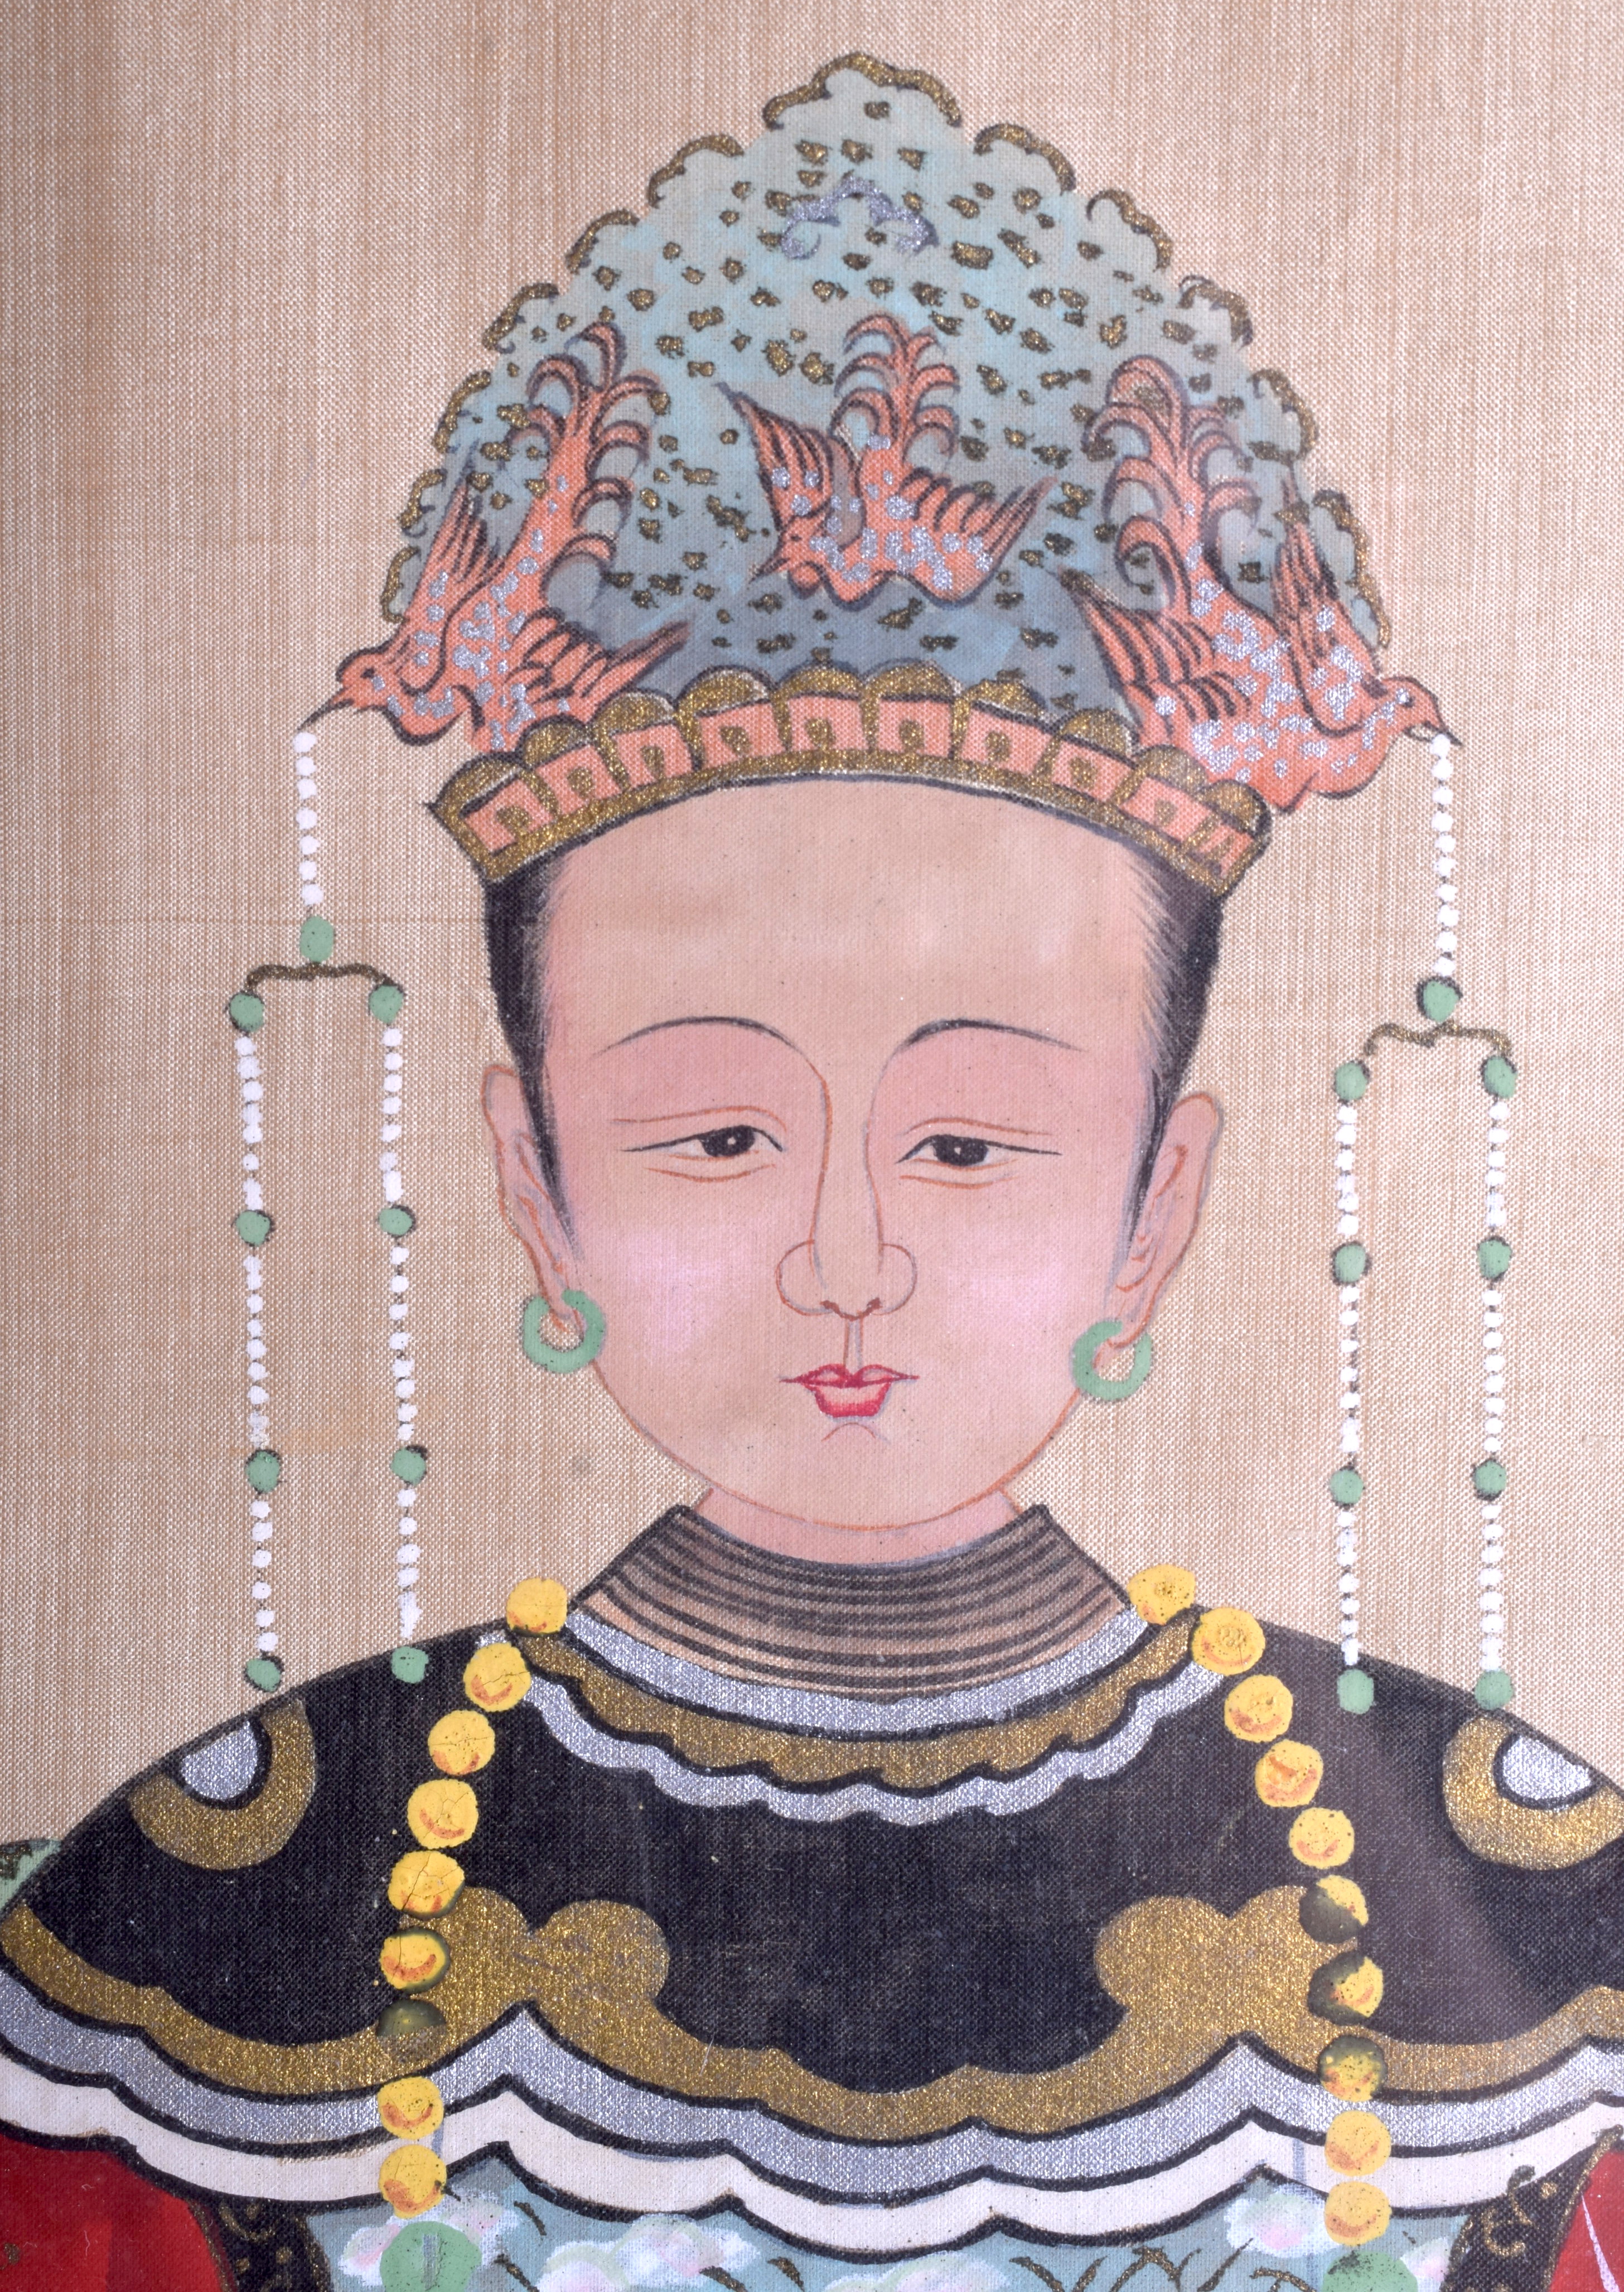 A CHINESE FRAMED ANCESTRAL WATERCOLOUR. Image 68 cm x 40 cm. - Image 2 of 7